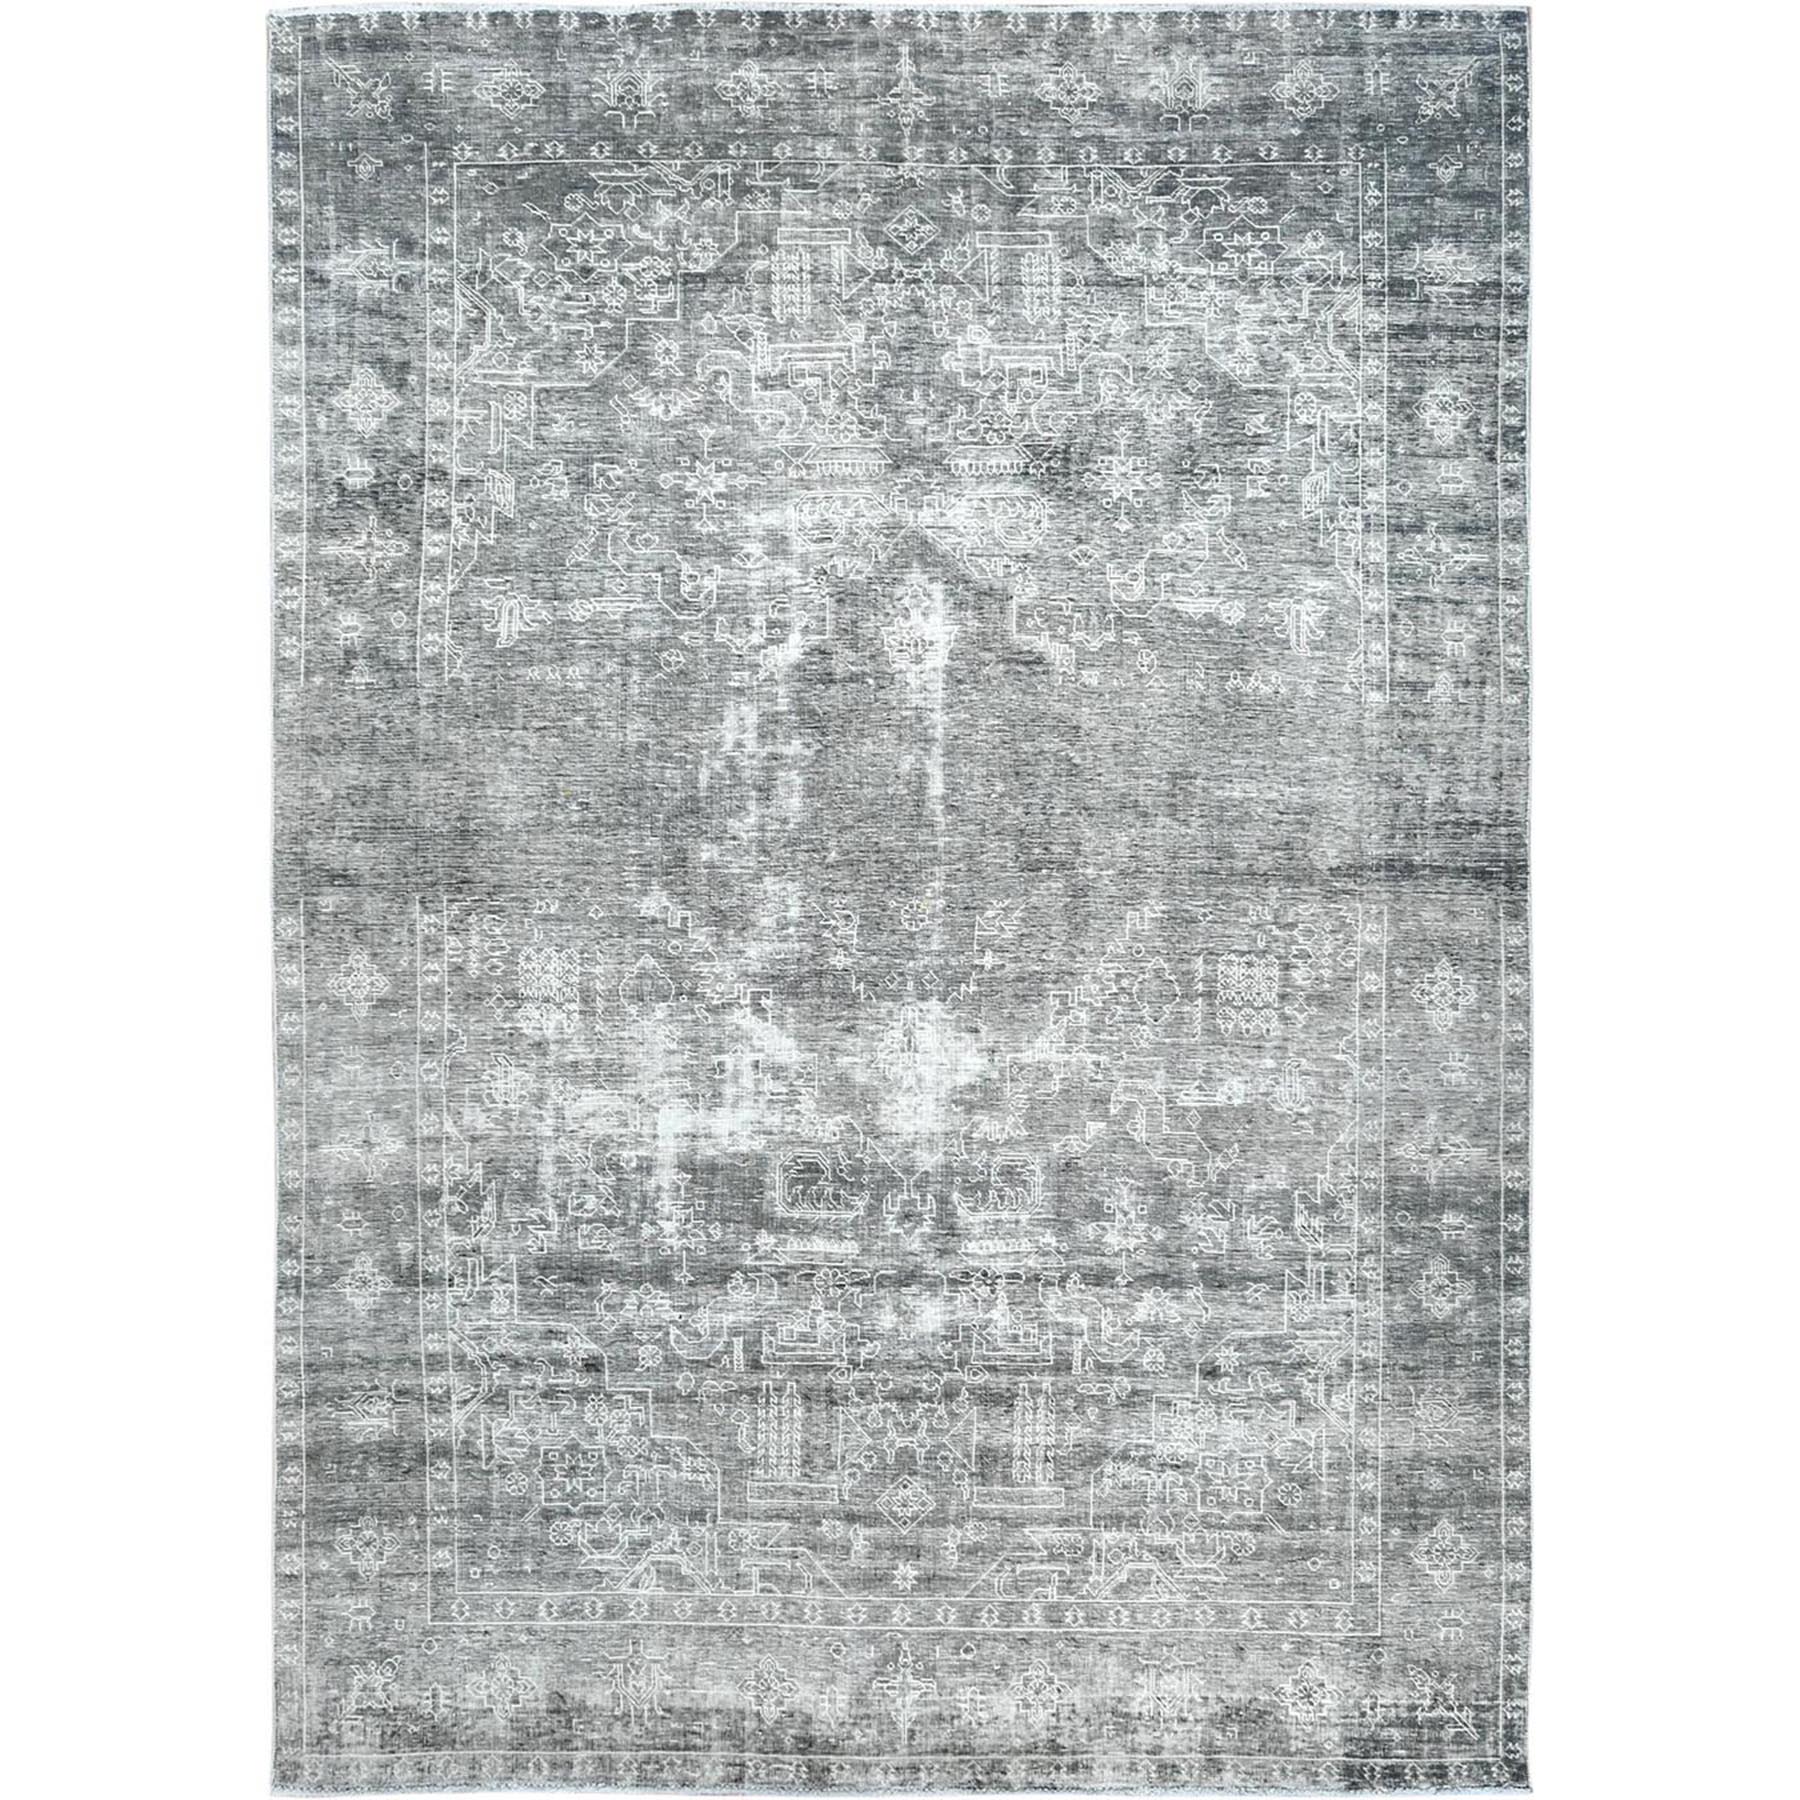  Wool Hand-Knotted Area Rug 7'3